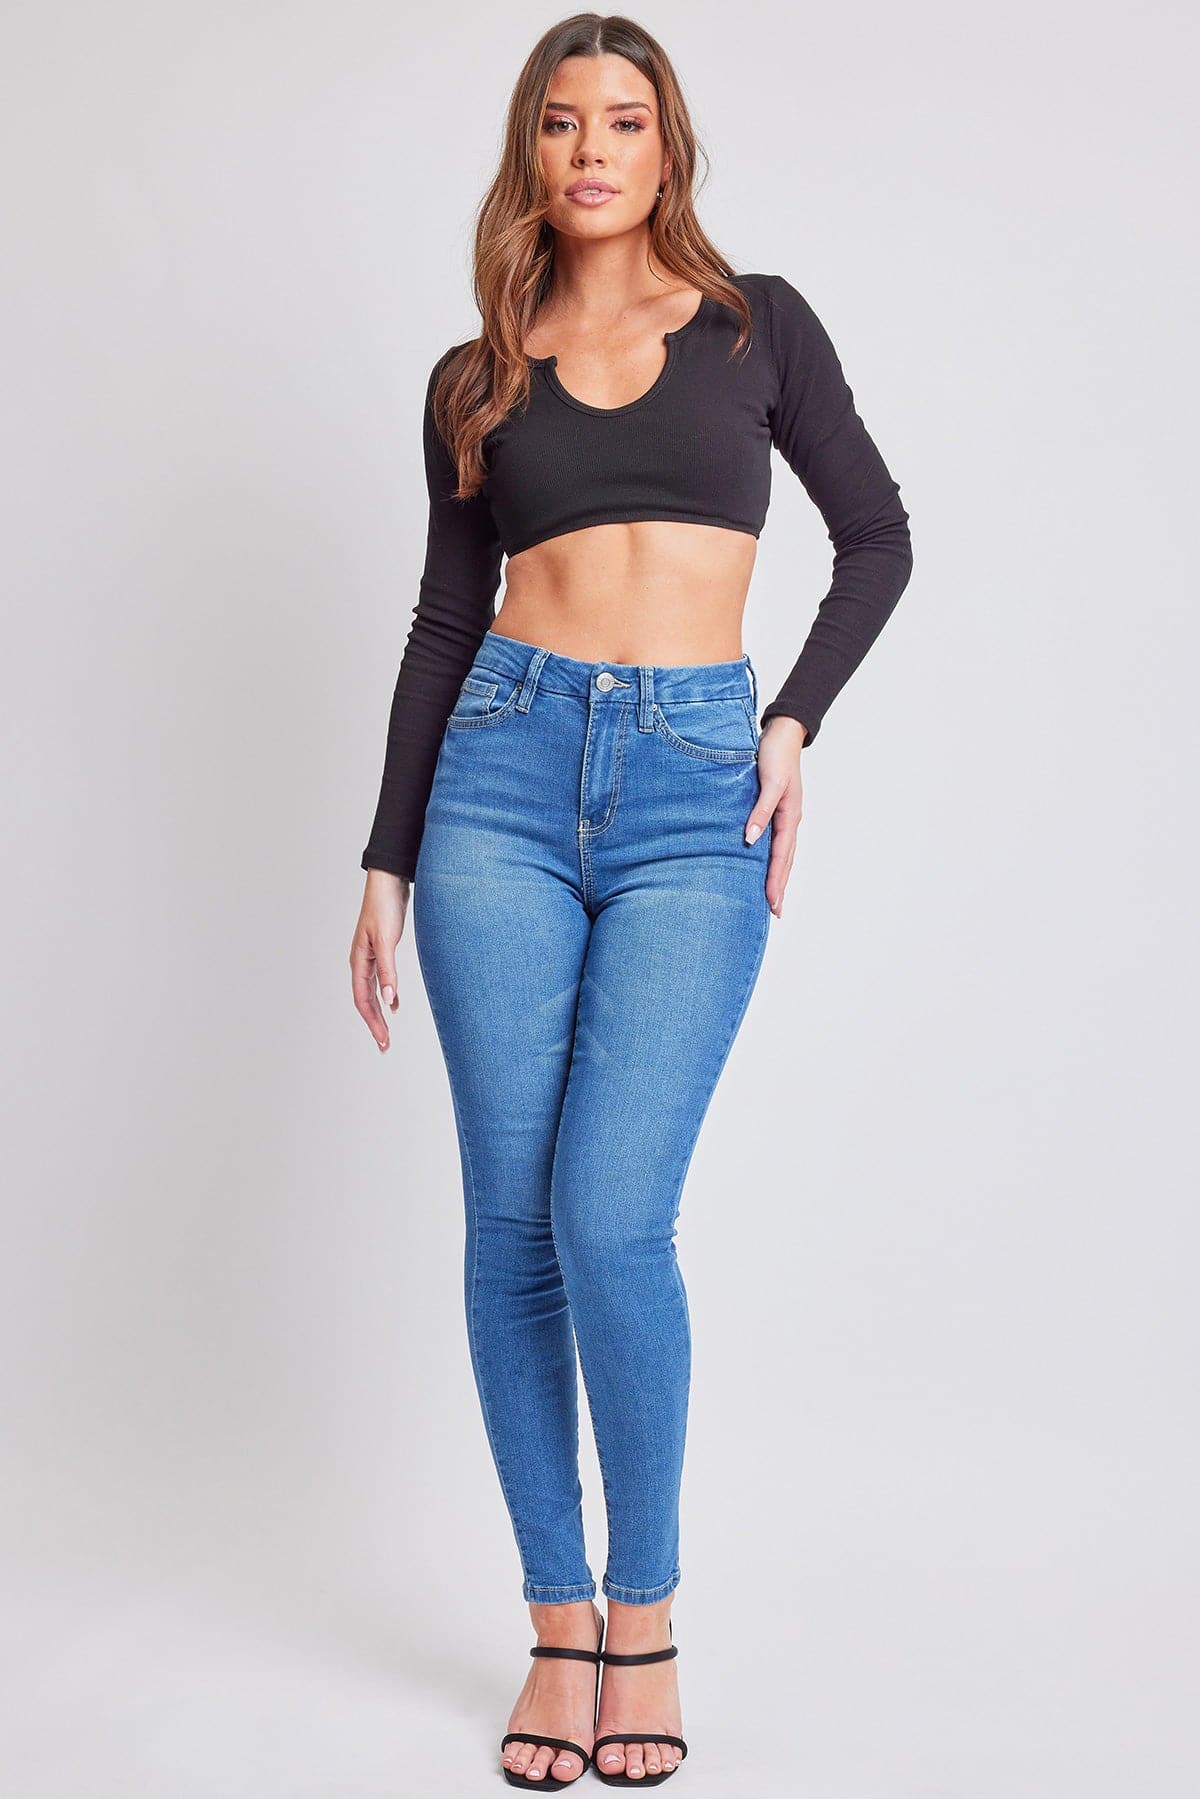 accentuate your curves 💋 - YMI Jeans